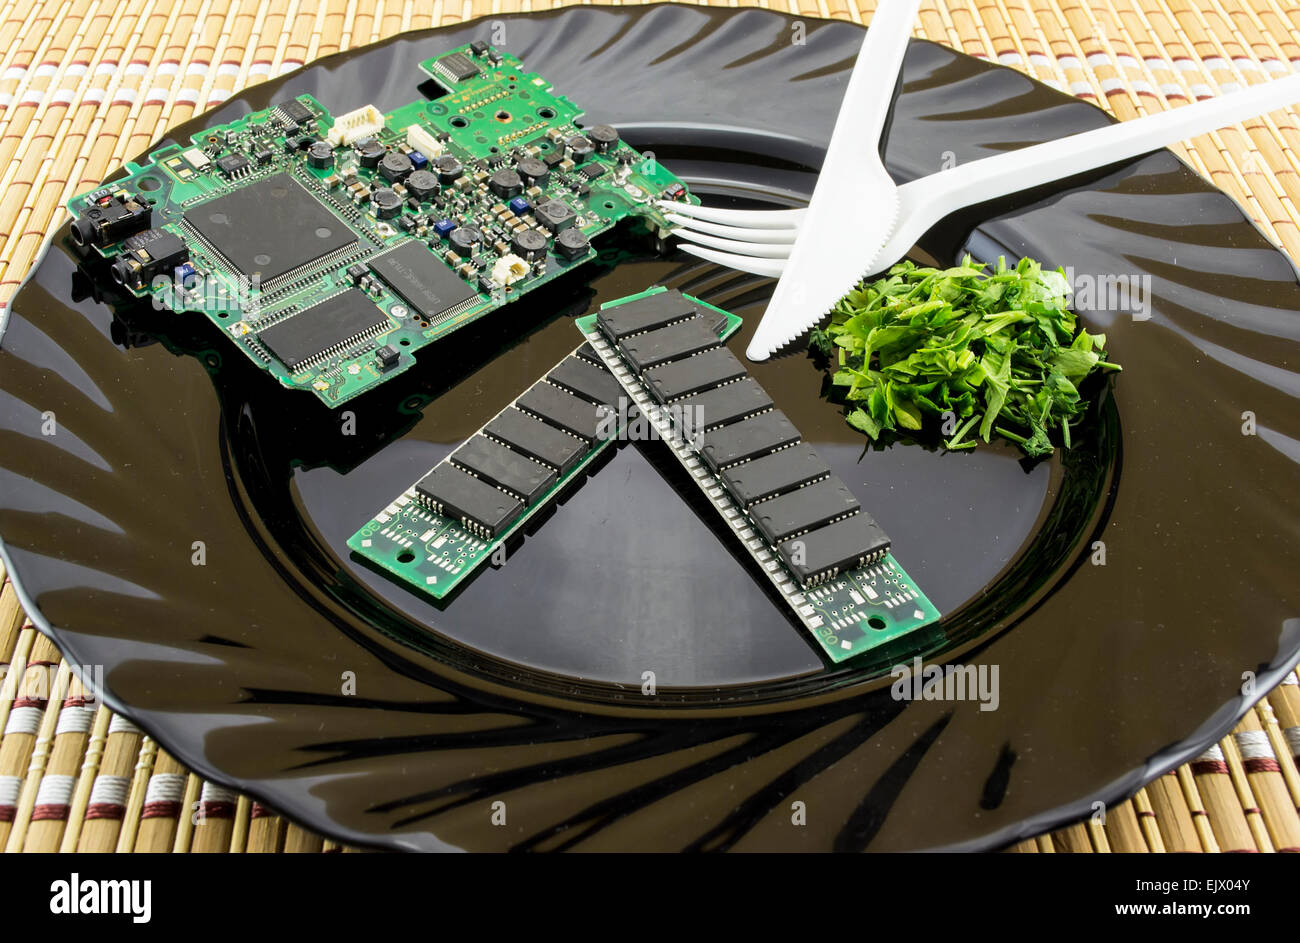 Consumer electronics concept with electronic components on a plate served alongside parsley Stock Photo